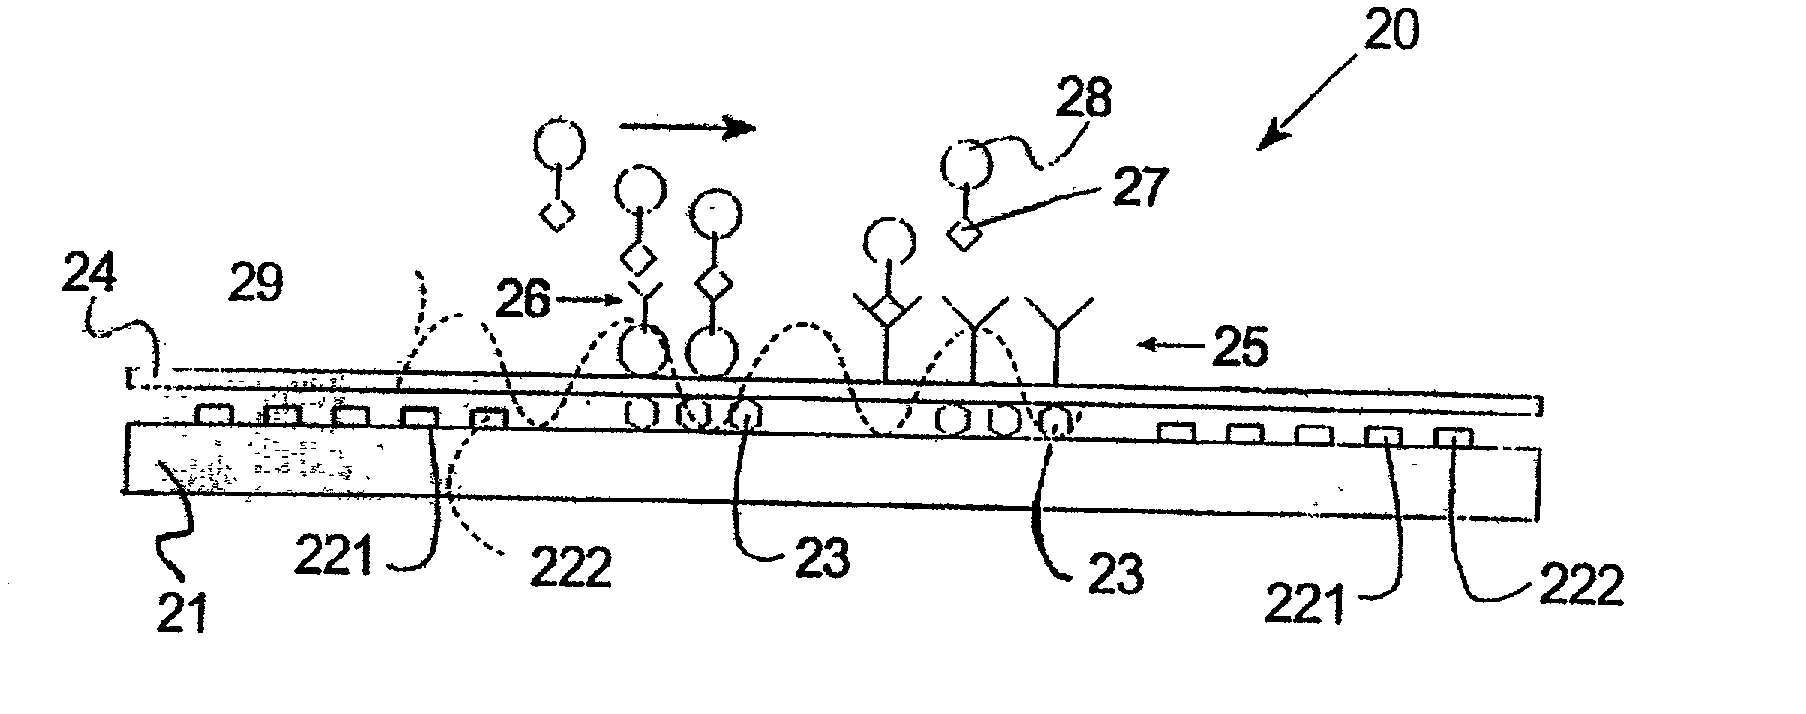 Systems and methods for localizing and analyzing samples on a bio-sensor chip